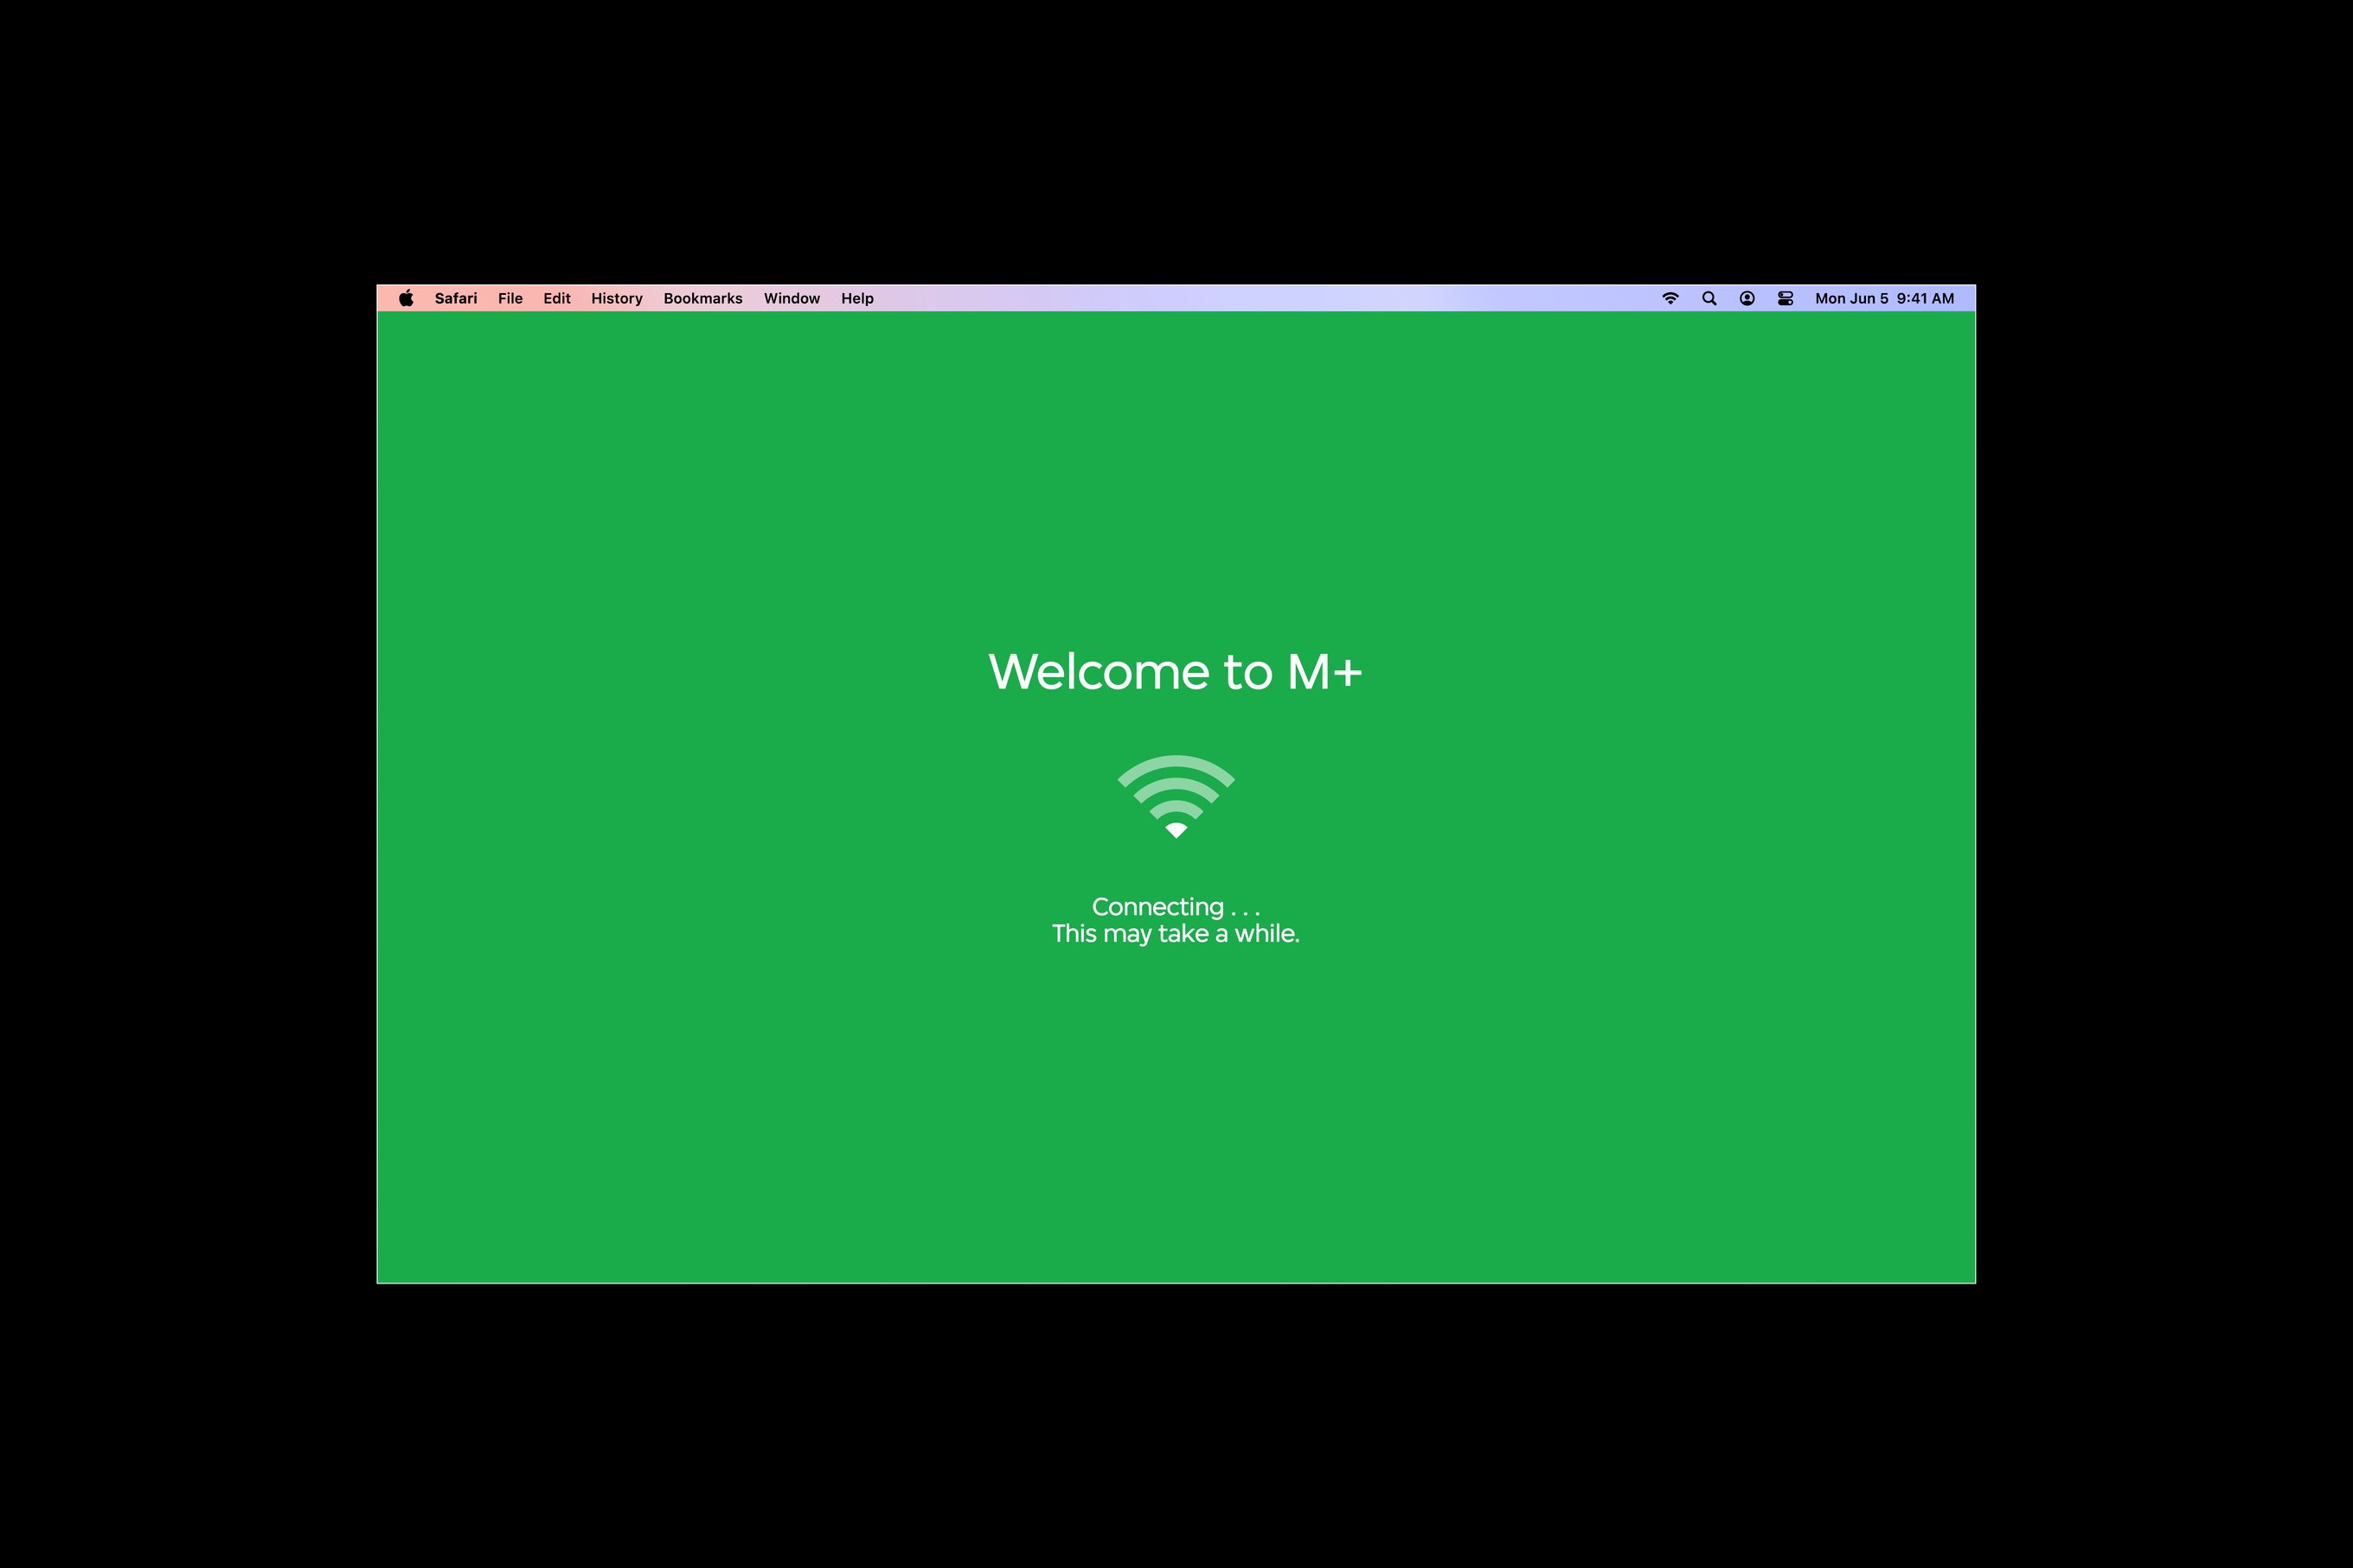 An interface of the M+ Wi-Fi loading page.